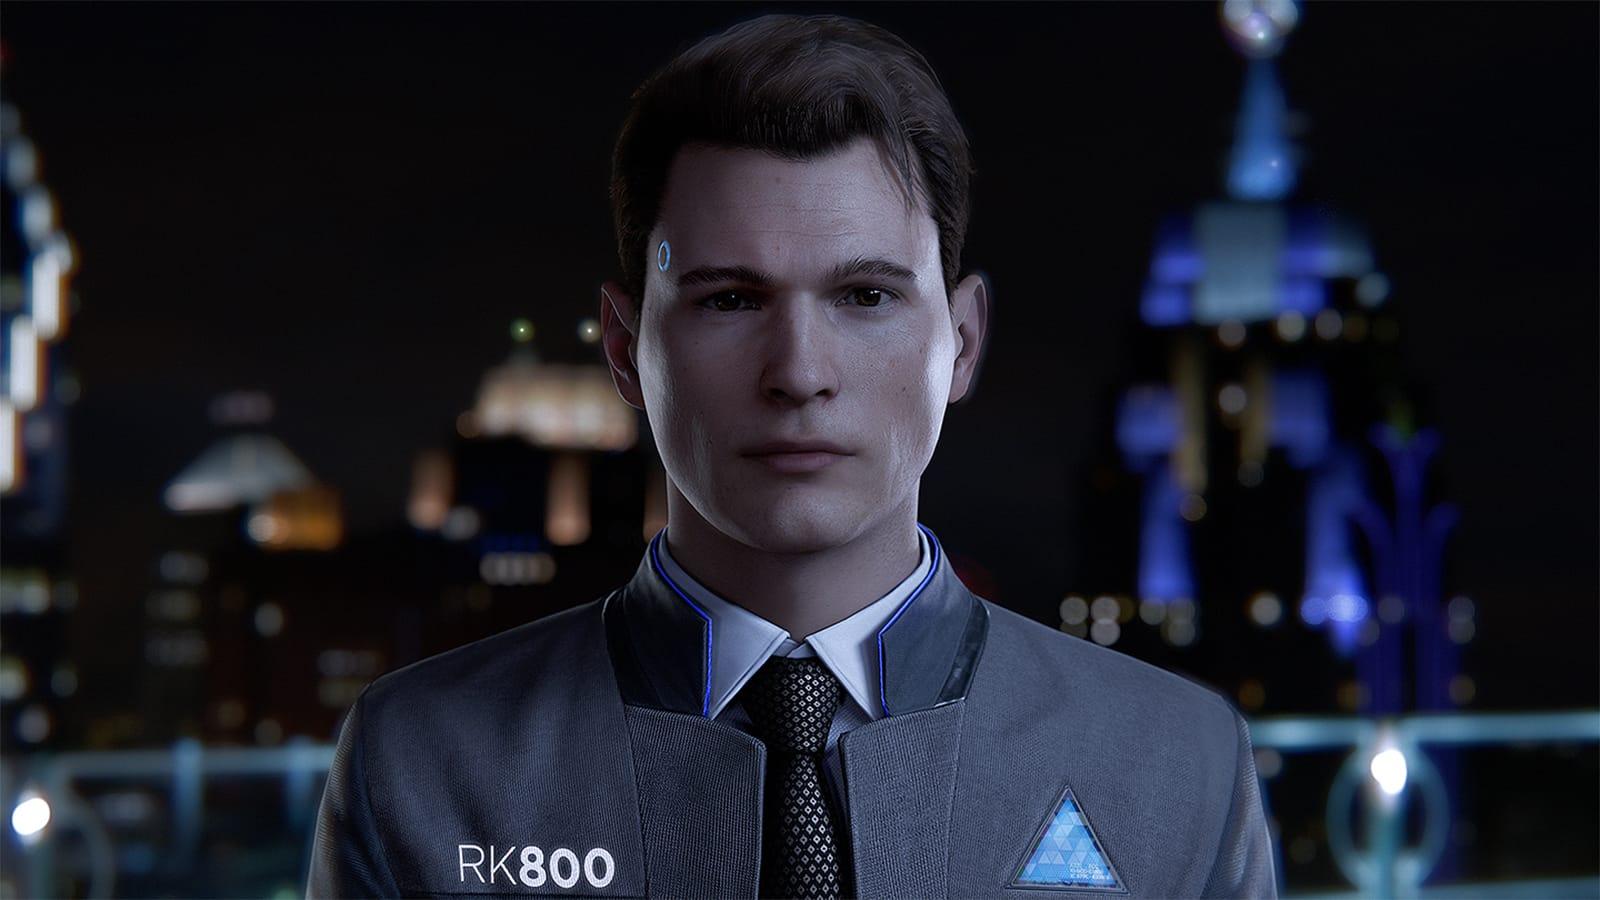 The character Connor appearing in Detroit Become Human